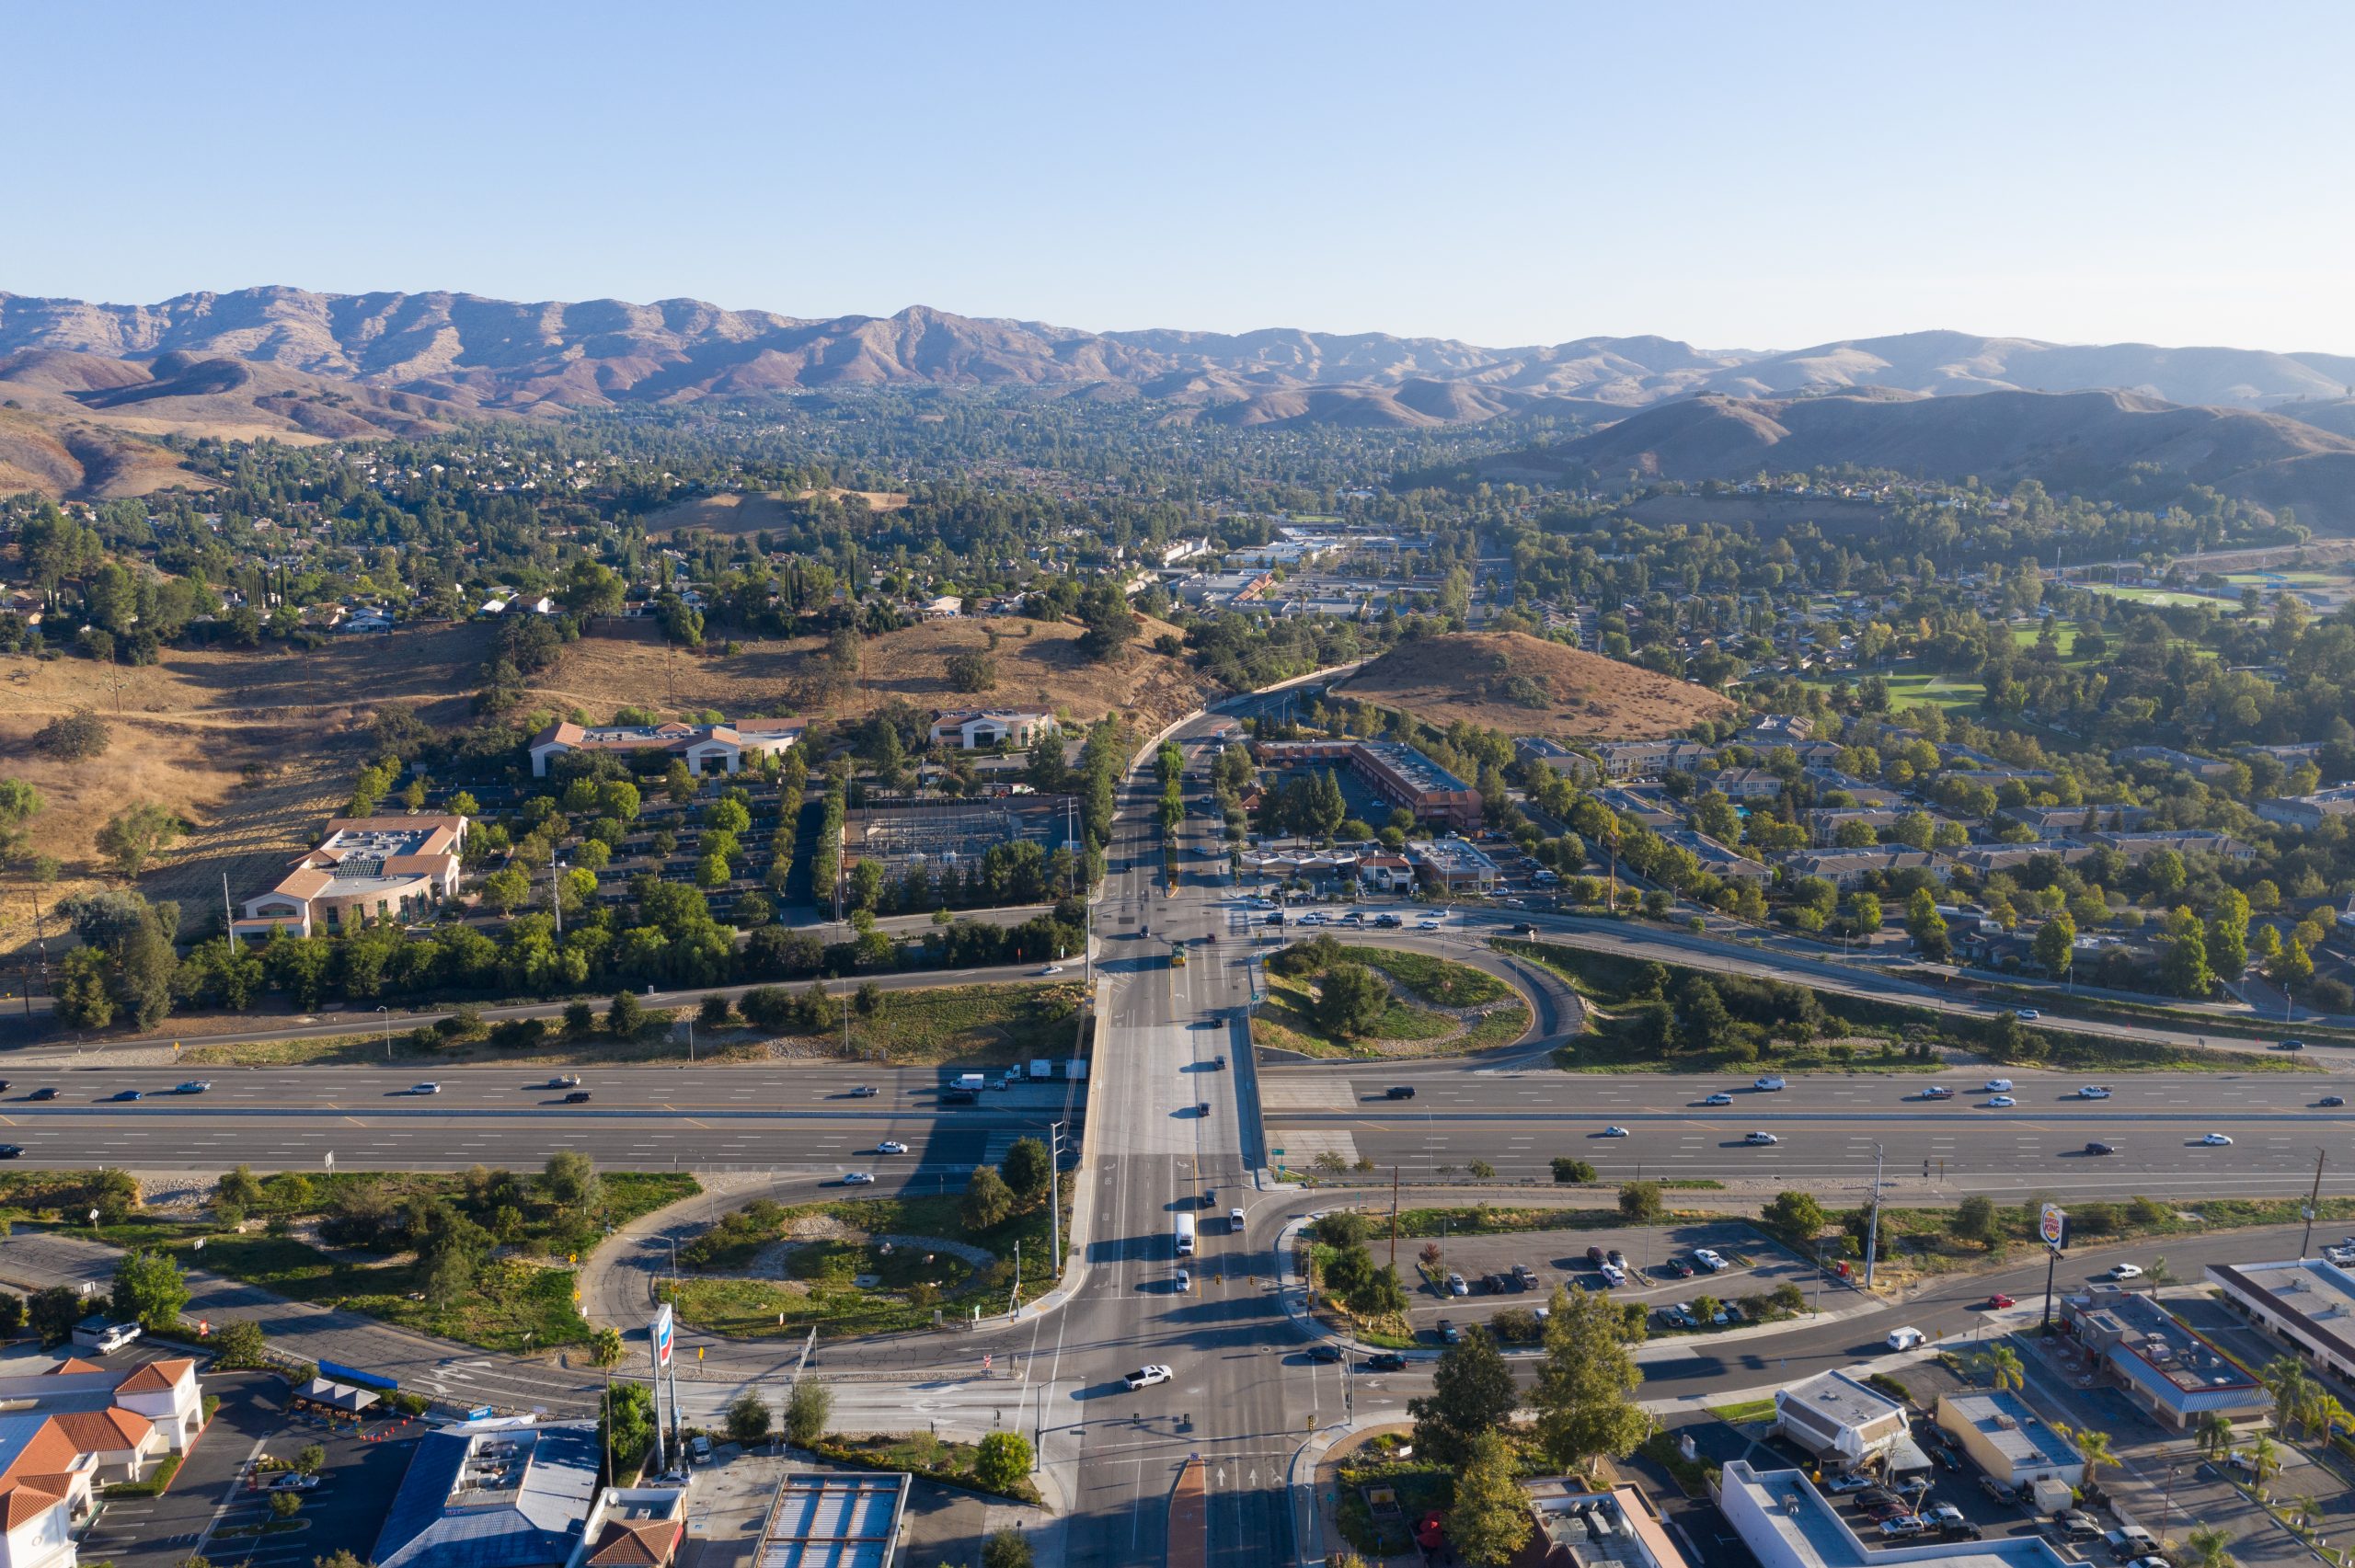 Agoura Hills, CA - Aug 26, 2020: Aerial view along Agoura Hills and the Ventura Freeway in Los Angeles County, California.